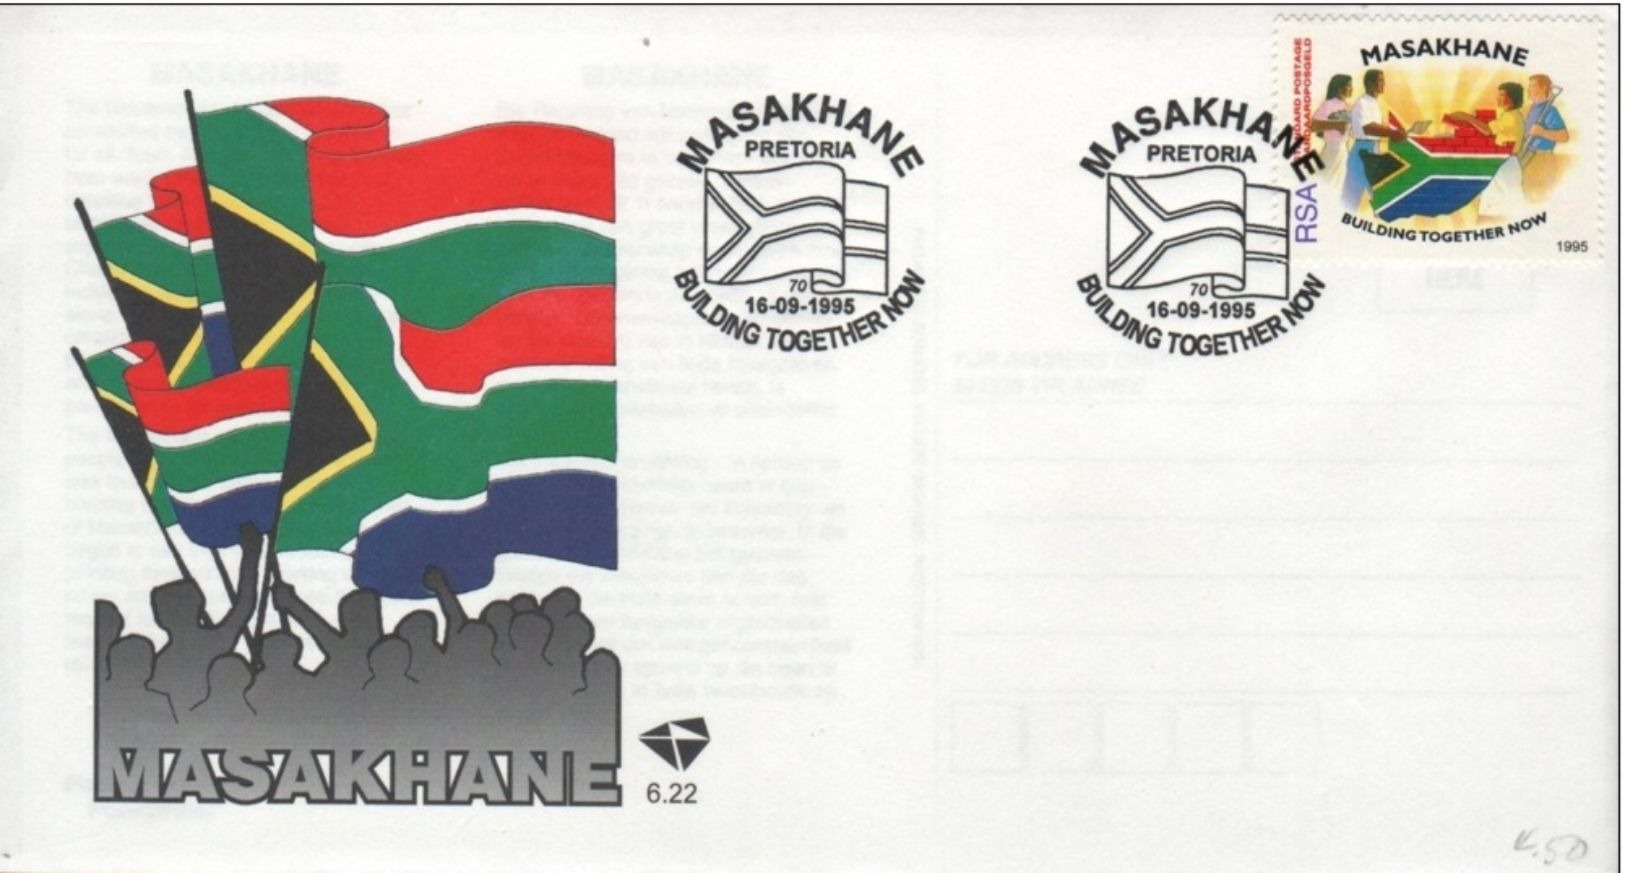 SOUTH AFRICA - FDC BUILDING TOGETHER NOW 1995 Mi #969 - FDC